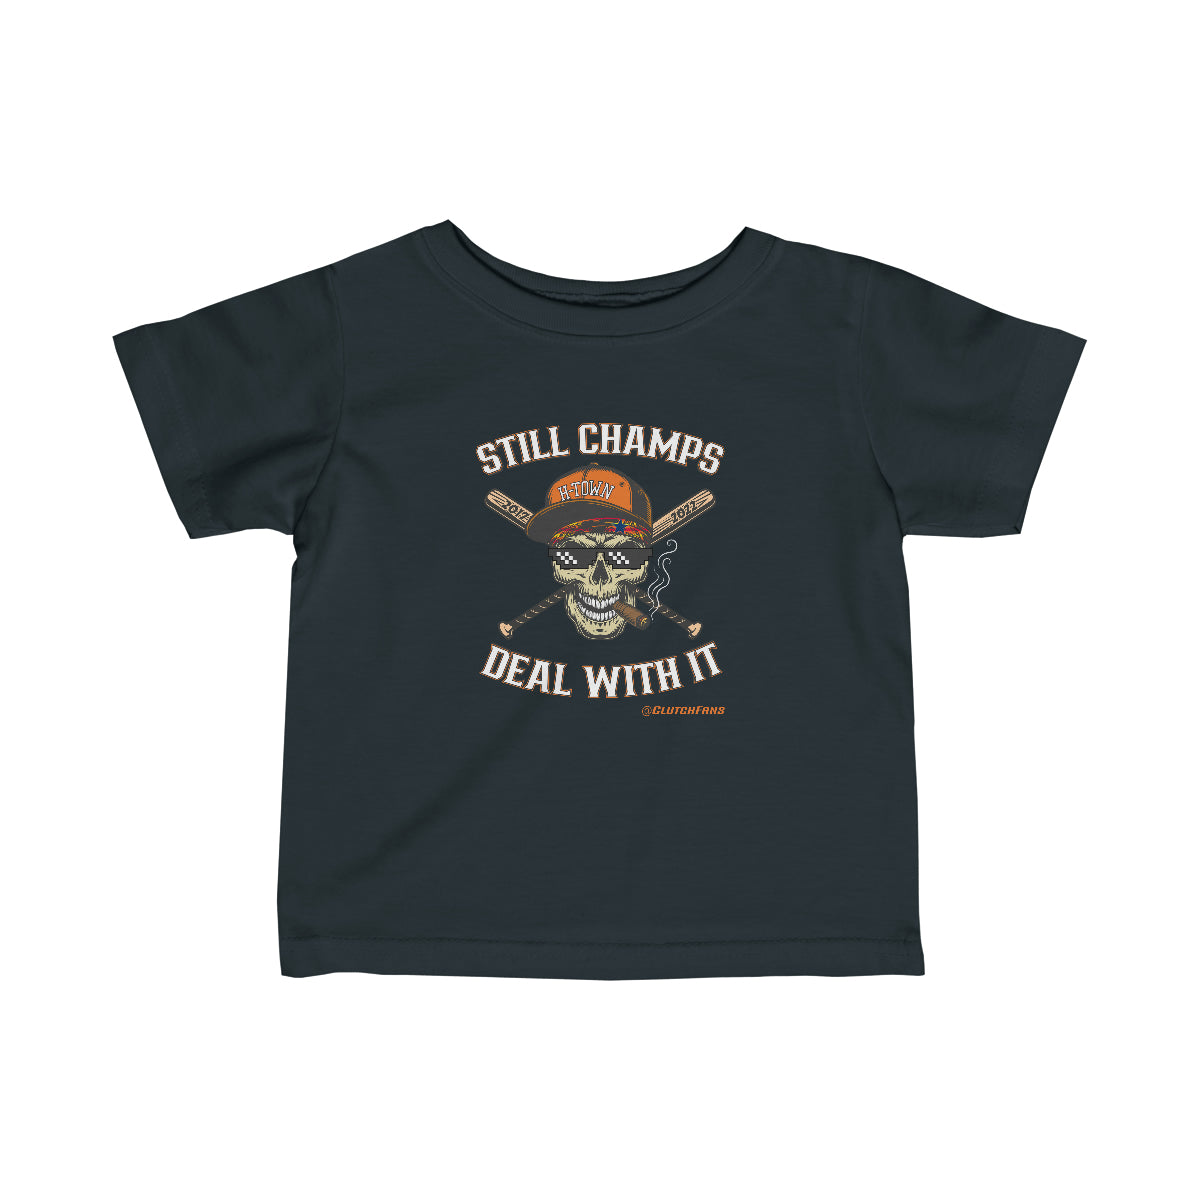 STILL CHAMPS: Deal With It! - INFANT Tee